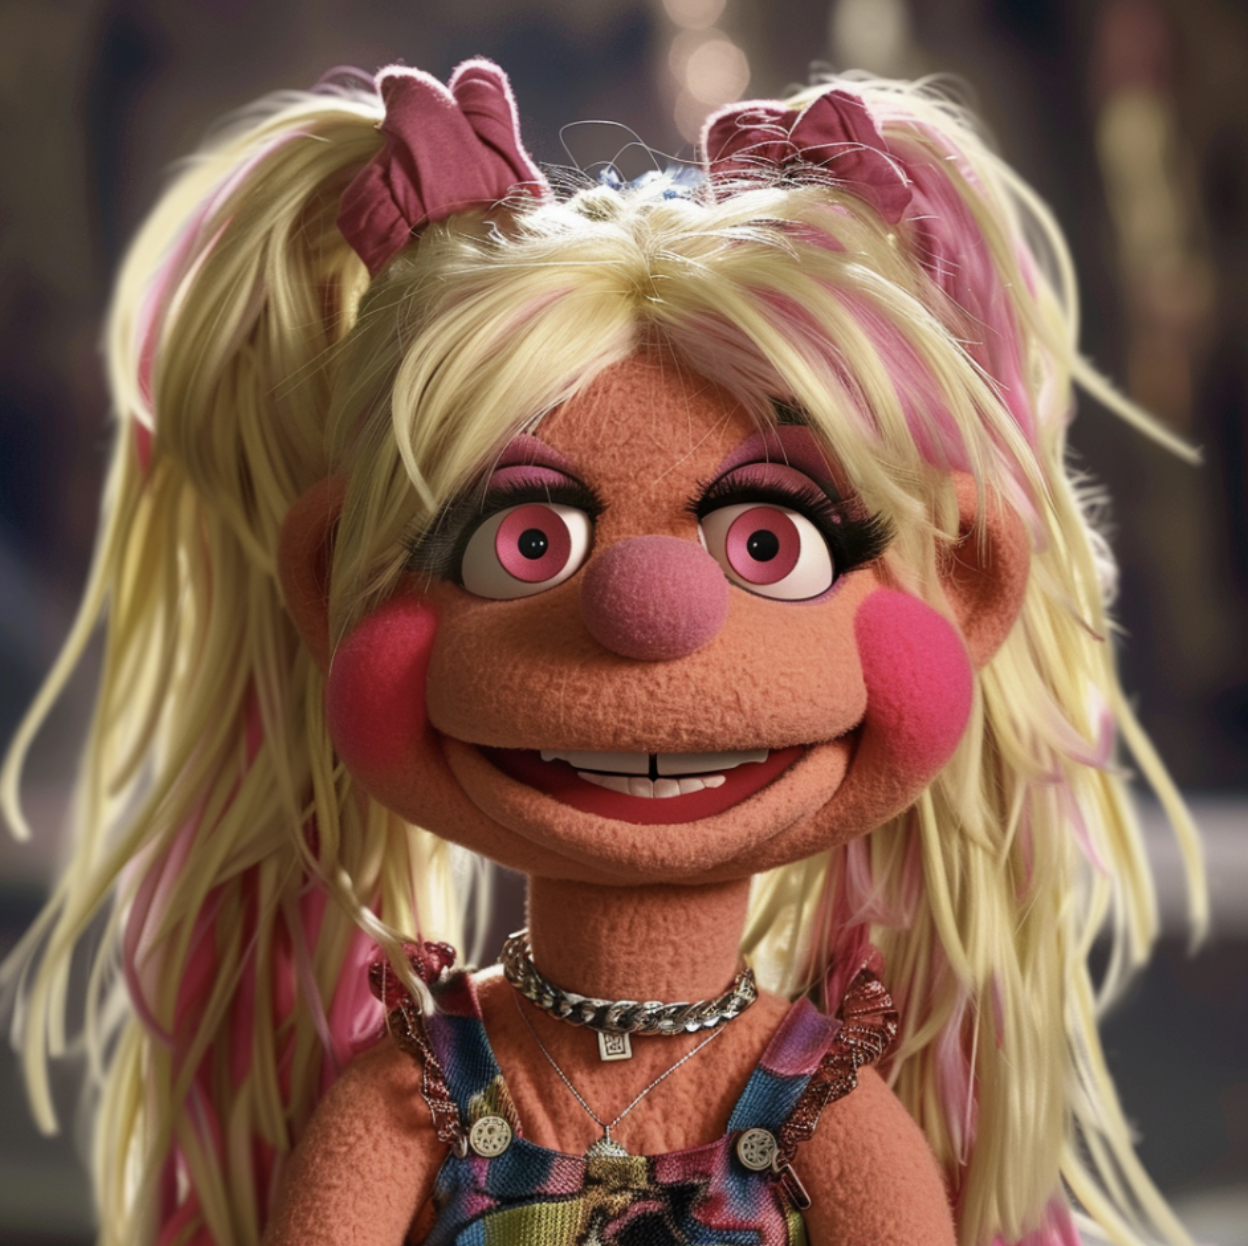 Muppet with blonde hair in loose pigtails, pink highlights, wearing a patterned dress